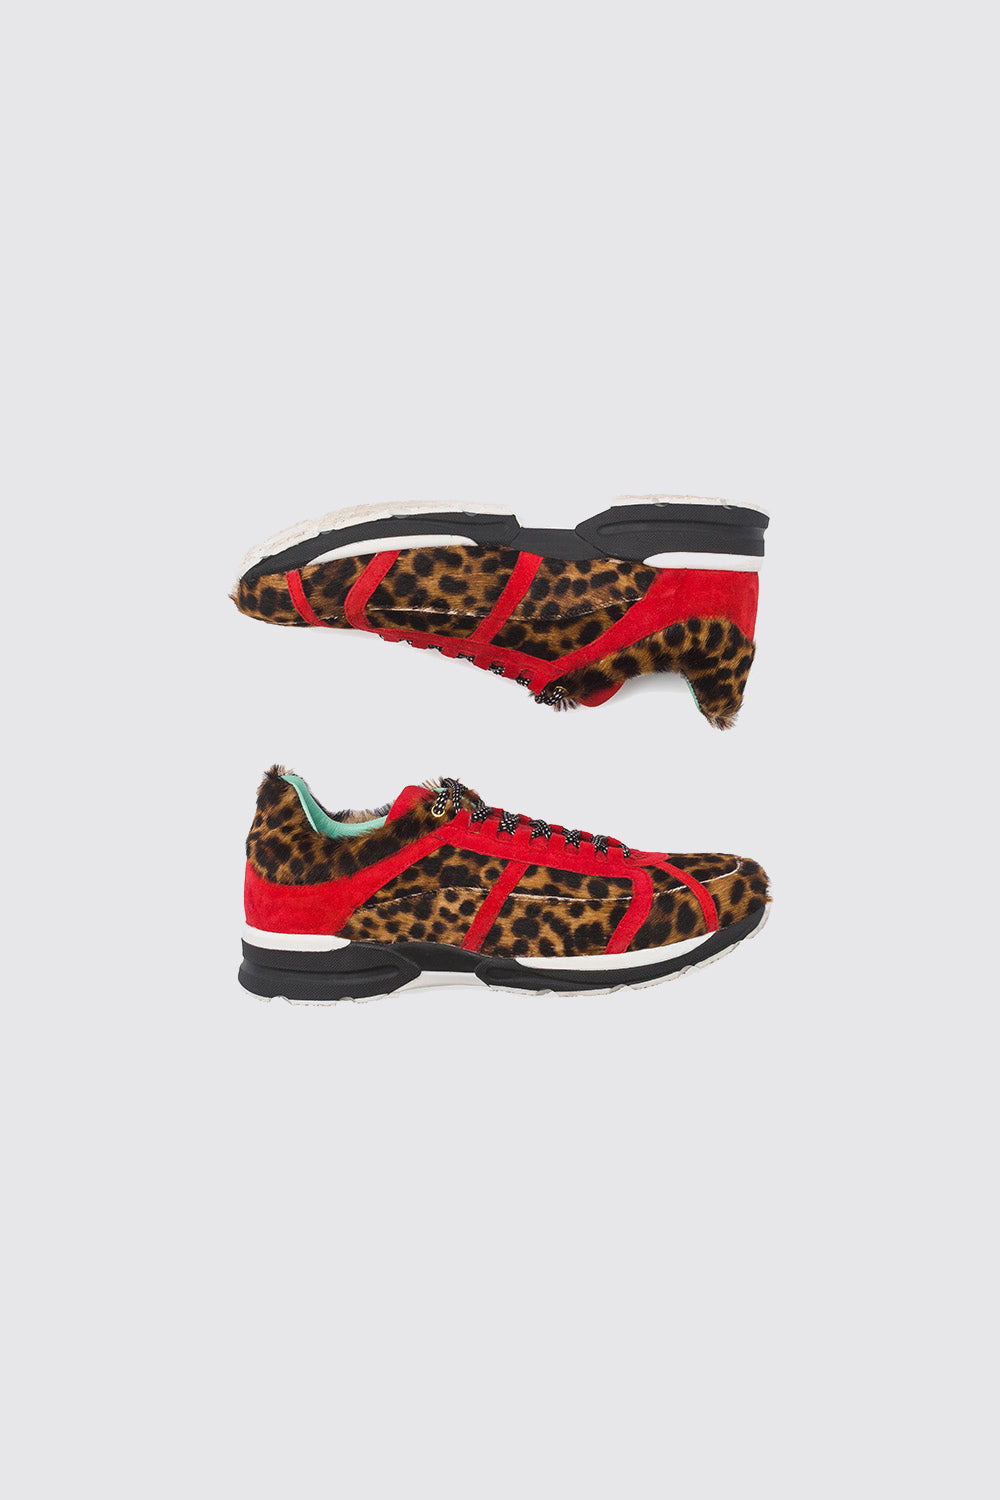 Running shoes in leopard printed leather